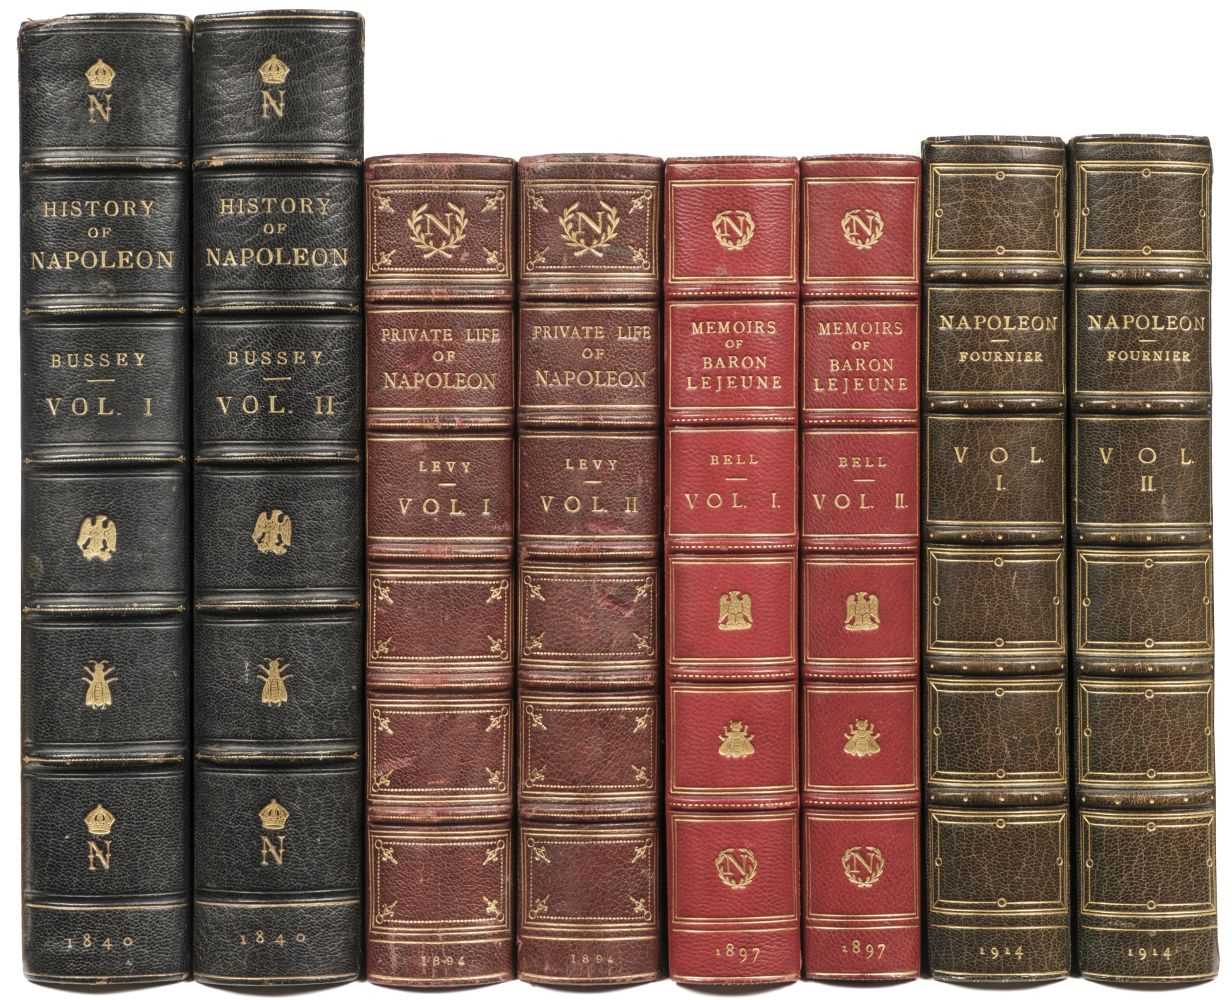 Lot 340 - Bussey (George Moir). History of Napoleon, 2 volumes, 1840